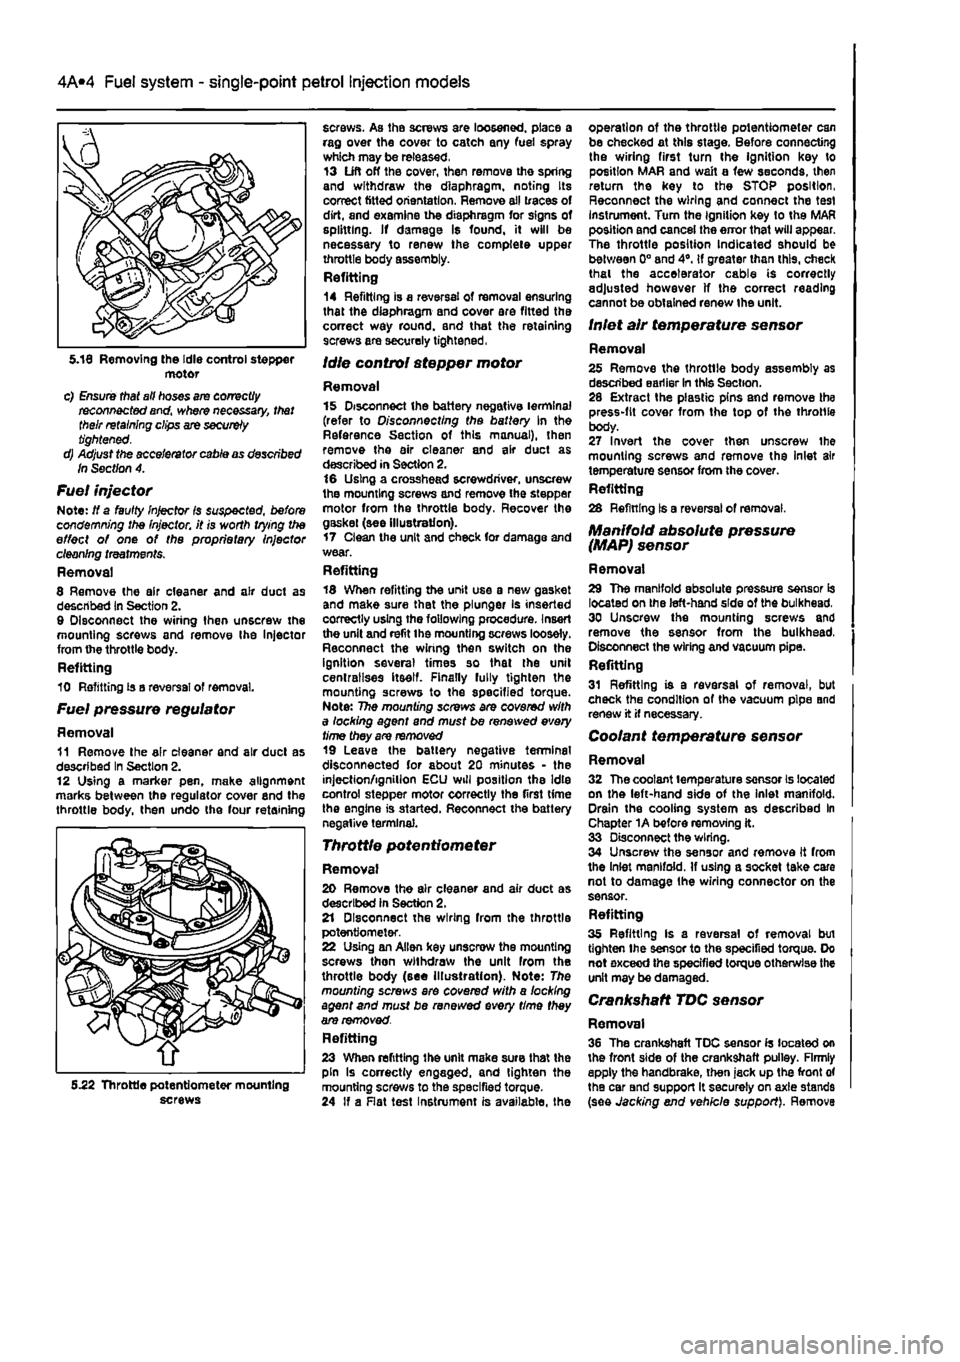 FIAT PUNTO 1996 176 / 1.G Workshop Manual 
4A*2 Fuel system - single-point petrol Injection models 
motor c) Ensure that all hoses are correctly reconnected and, where necessary, that their retaining clips are securely tightened. d) Adjust th